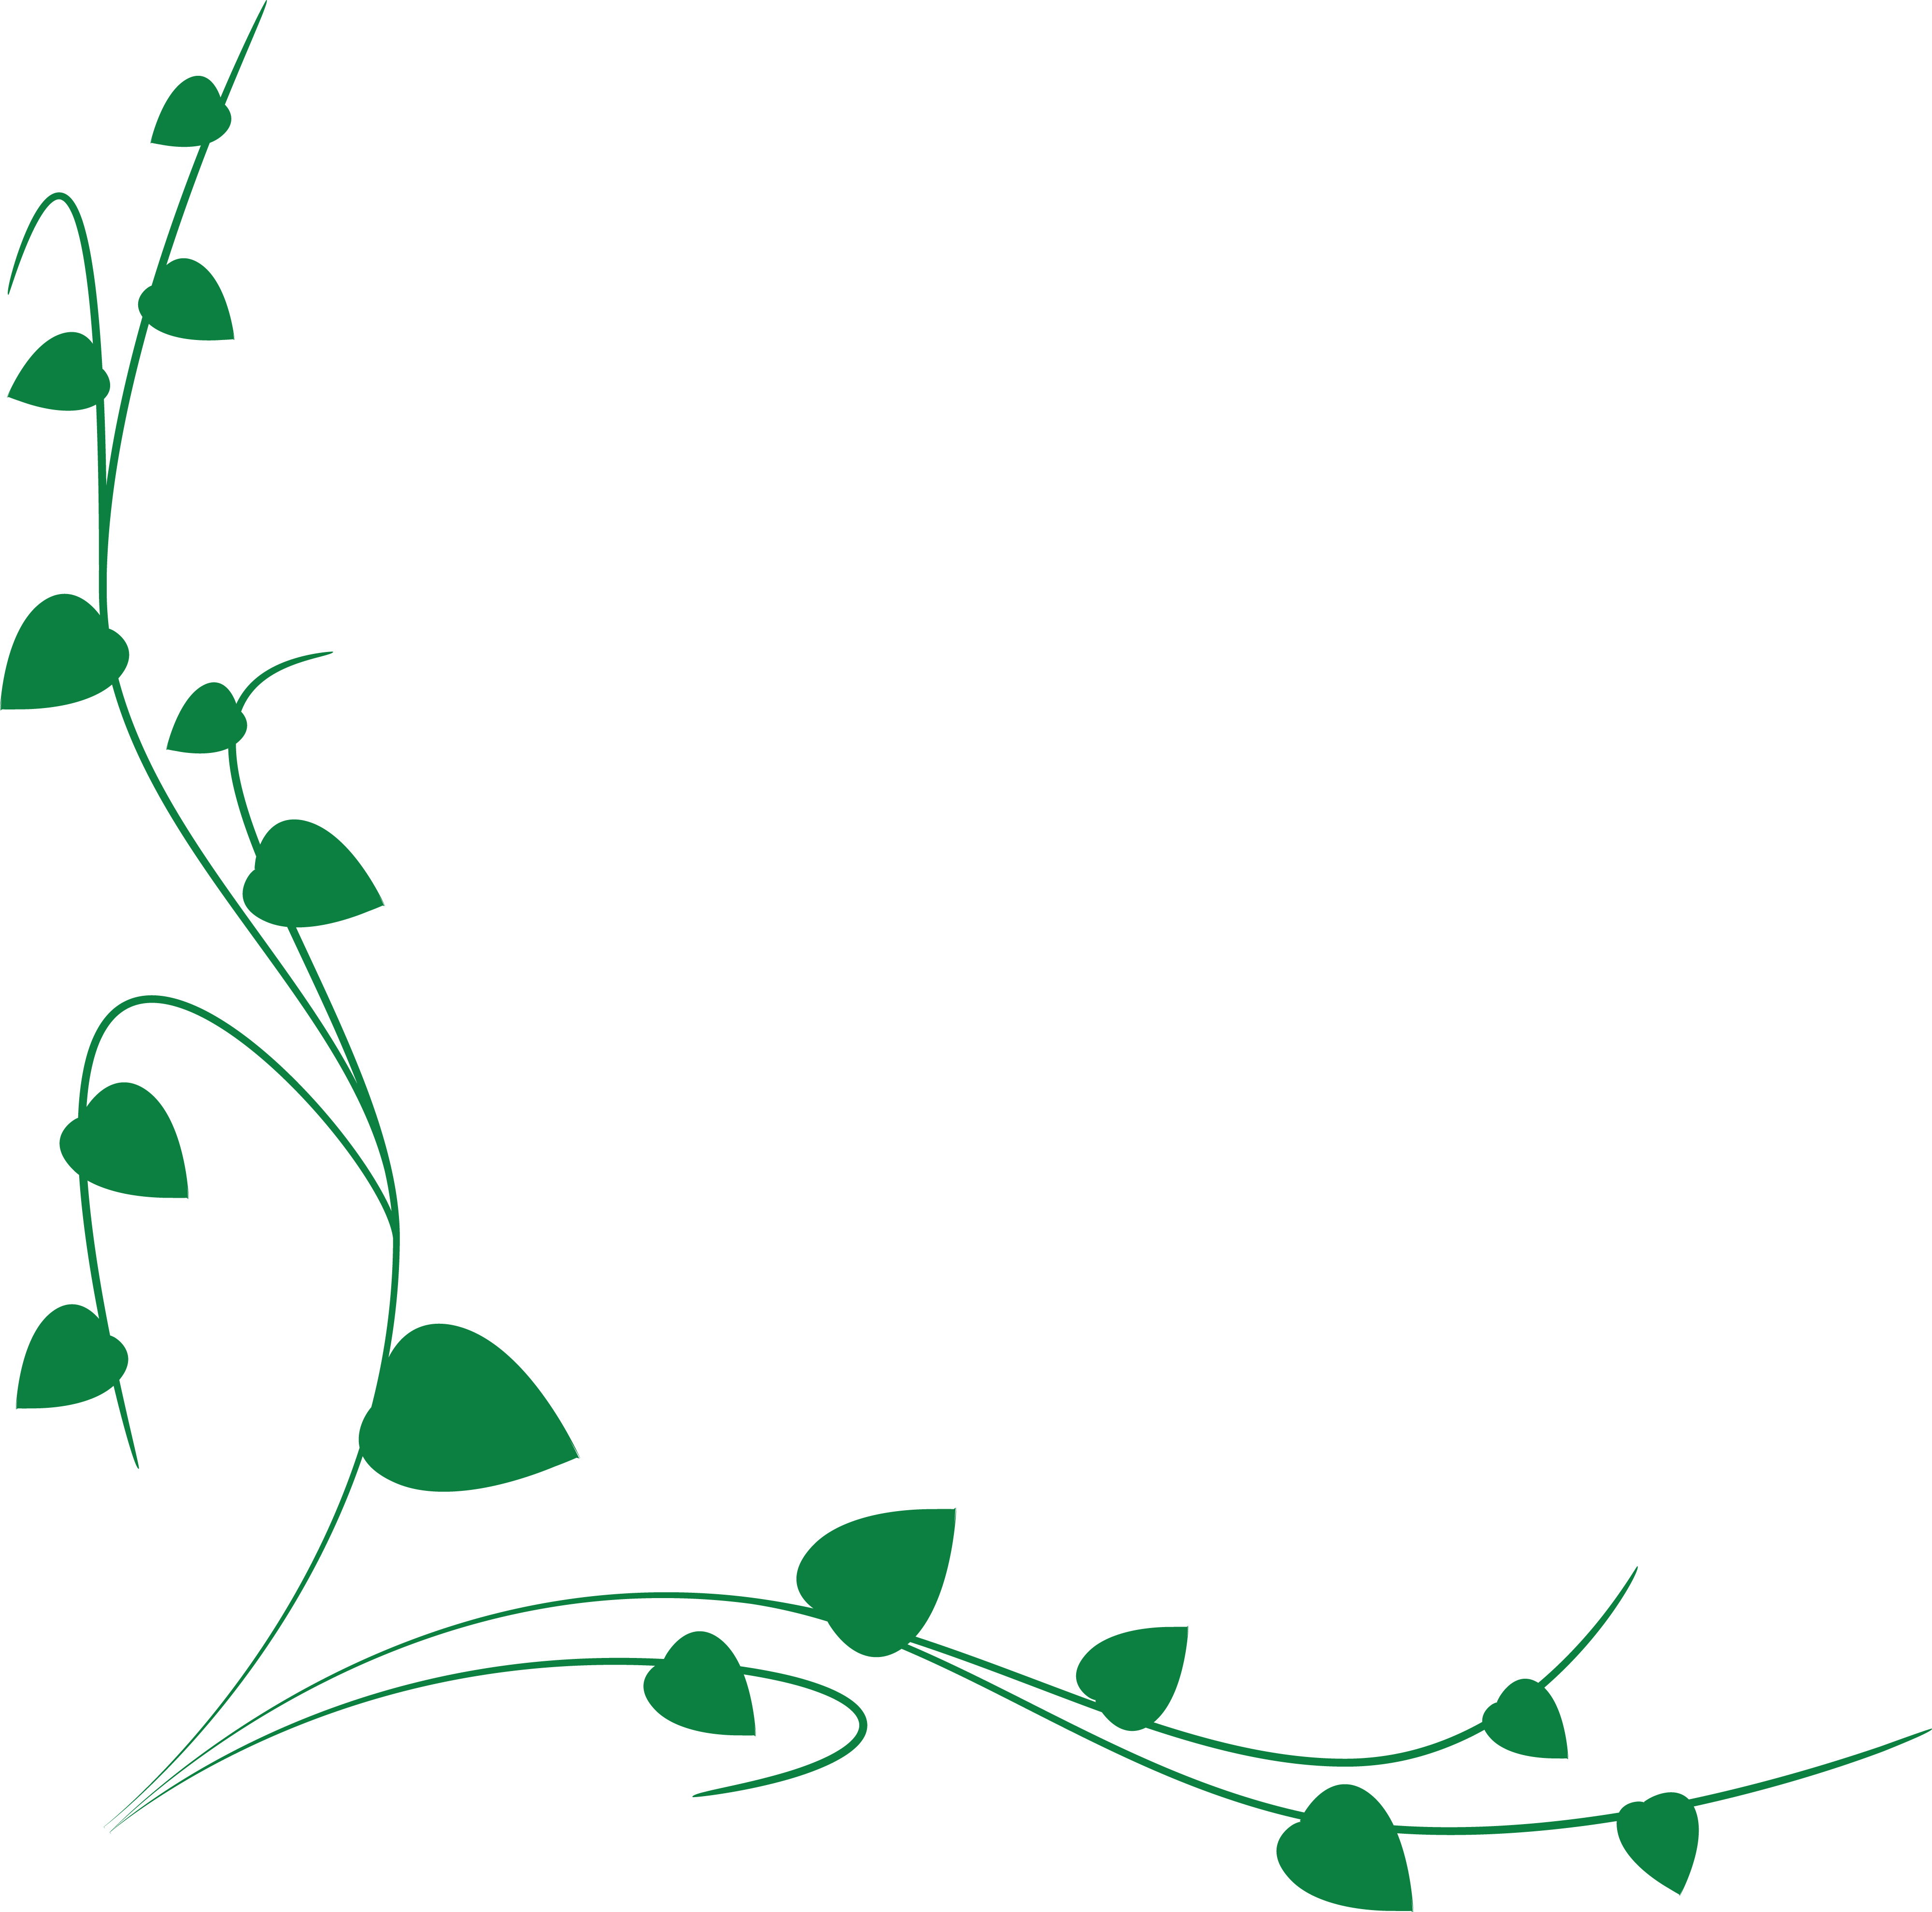 Download Free Clipart Of A green vine border